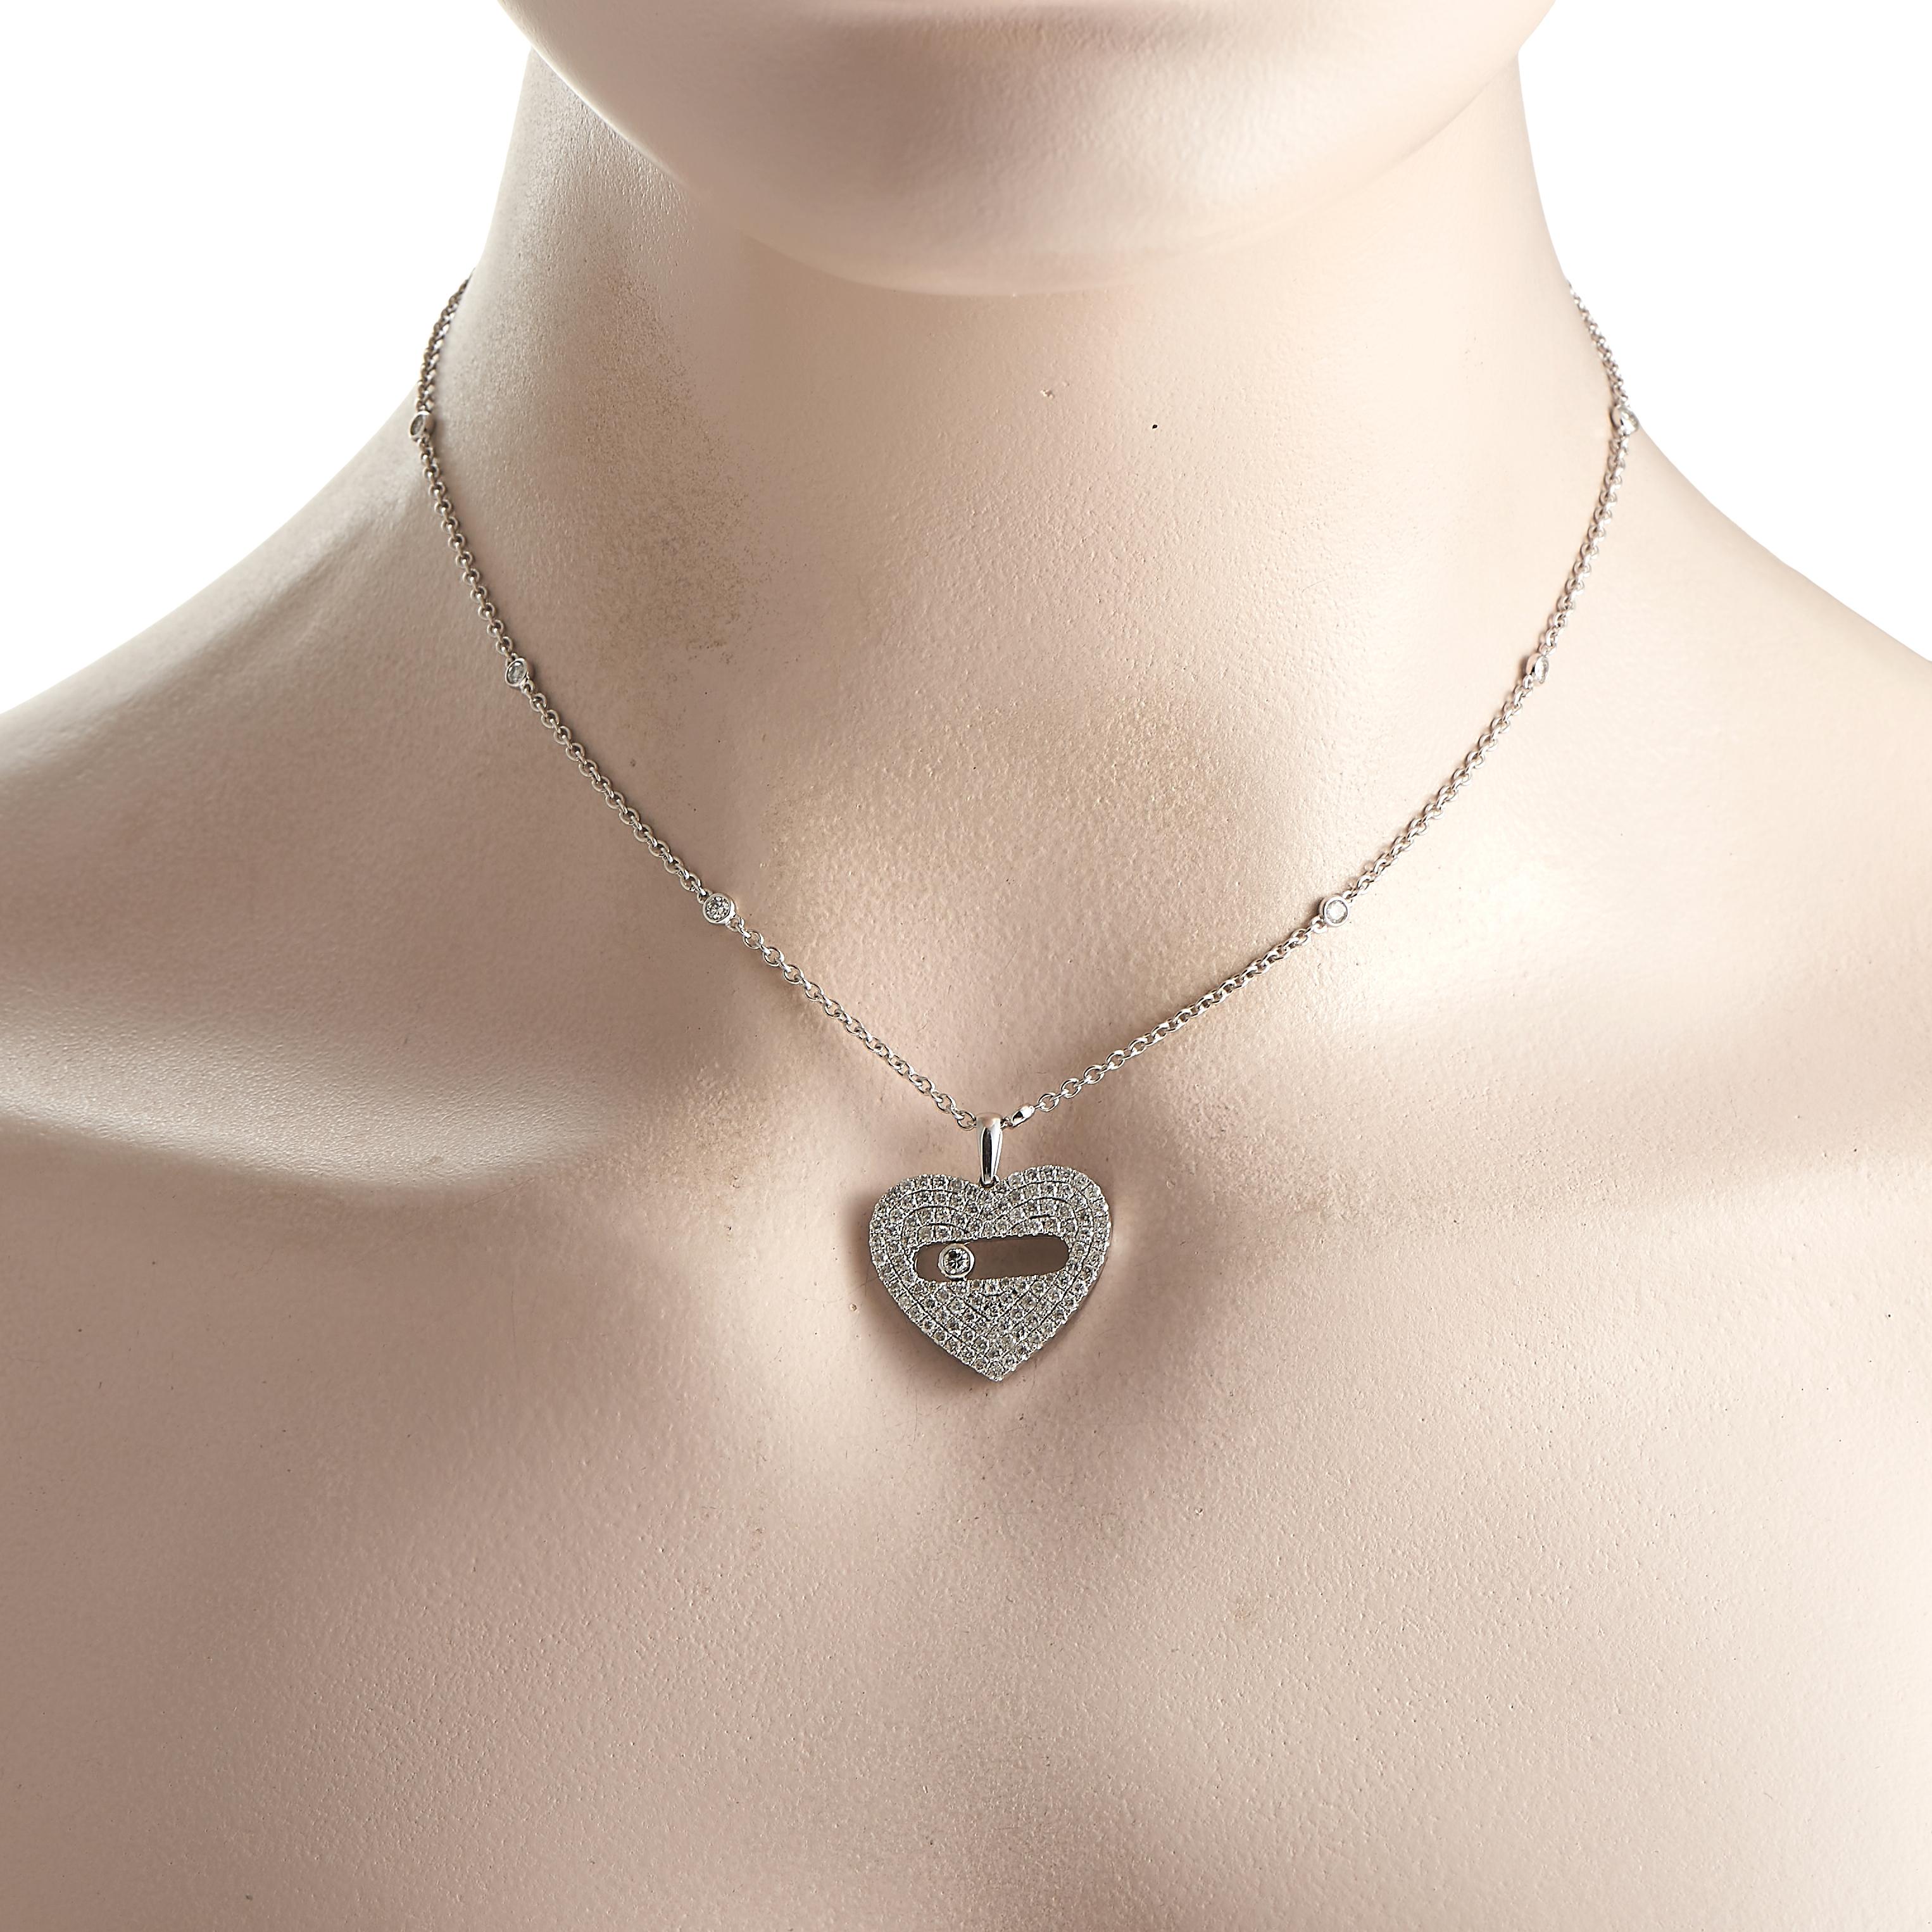 This necklace could well be what's missing in your arsenal. It features a 15 long chain with a lobster clasp and a 1 by 0.80 heart-shaped pendant. The pendant glitters with pav-set round diamonds and decorated with an elongated oval hole at the